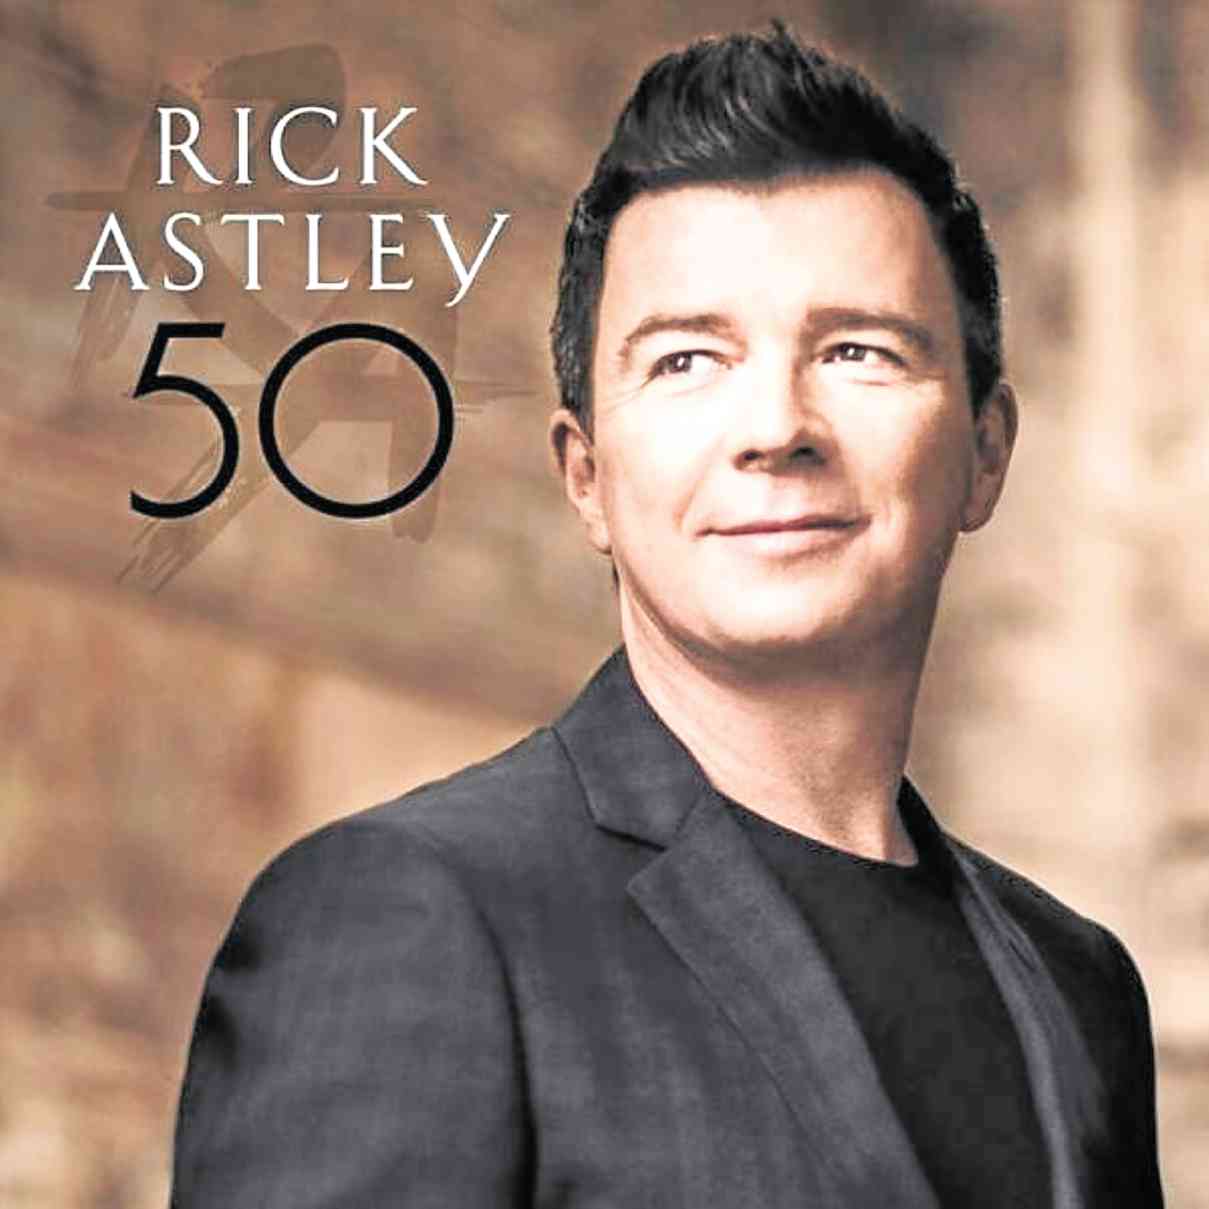 For Rick Astley, life begins at â€˜50â€™ | Inquirer Entertainment.